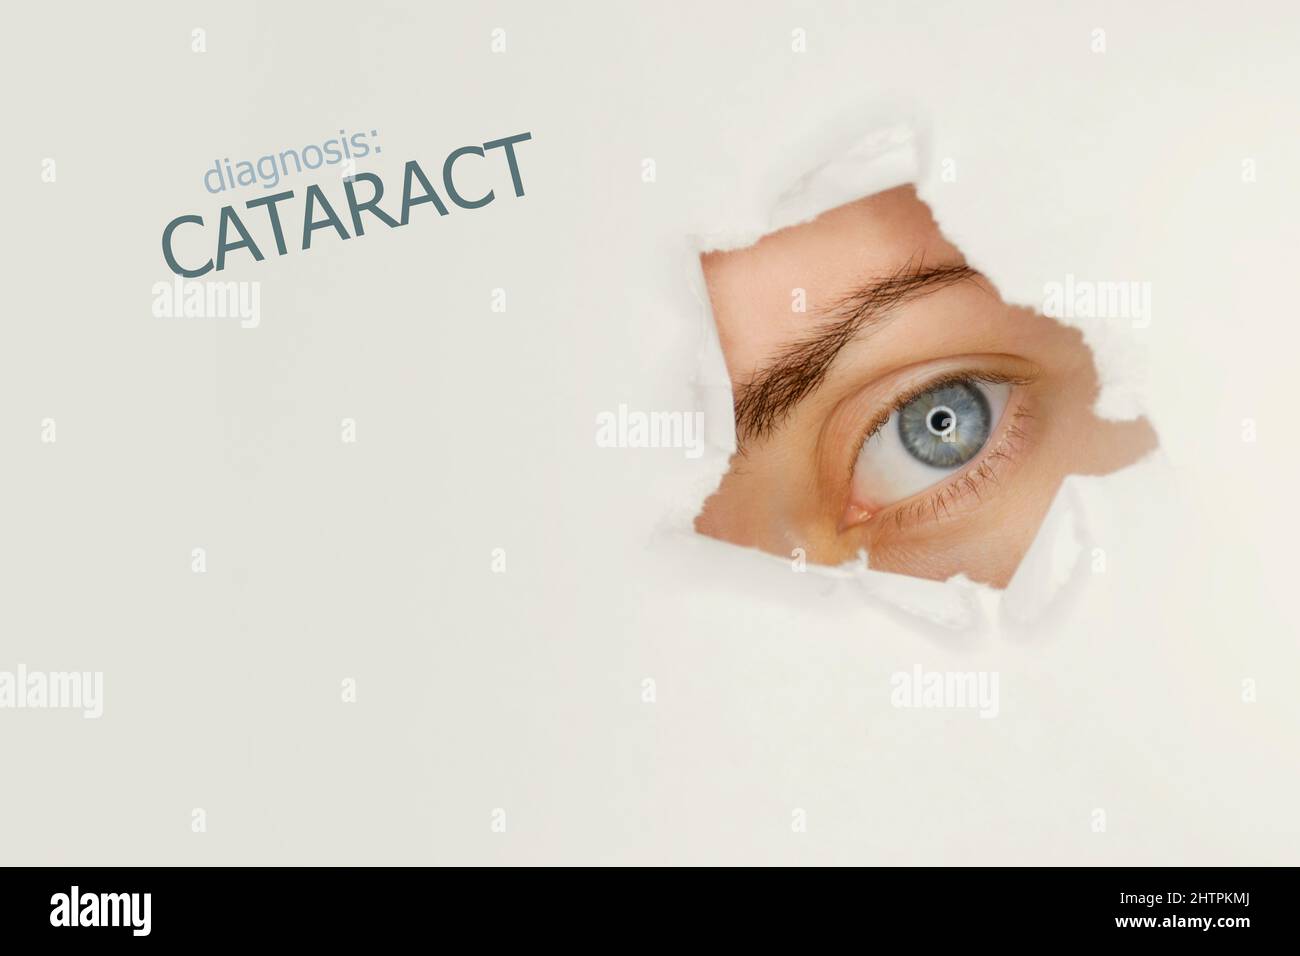 Cataract disease poster with blue eye on right. Studio grey background Stock Photo